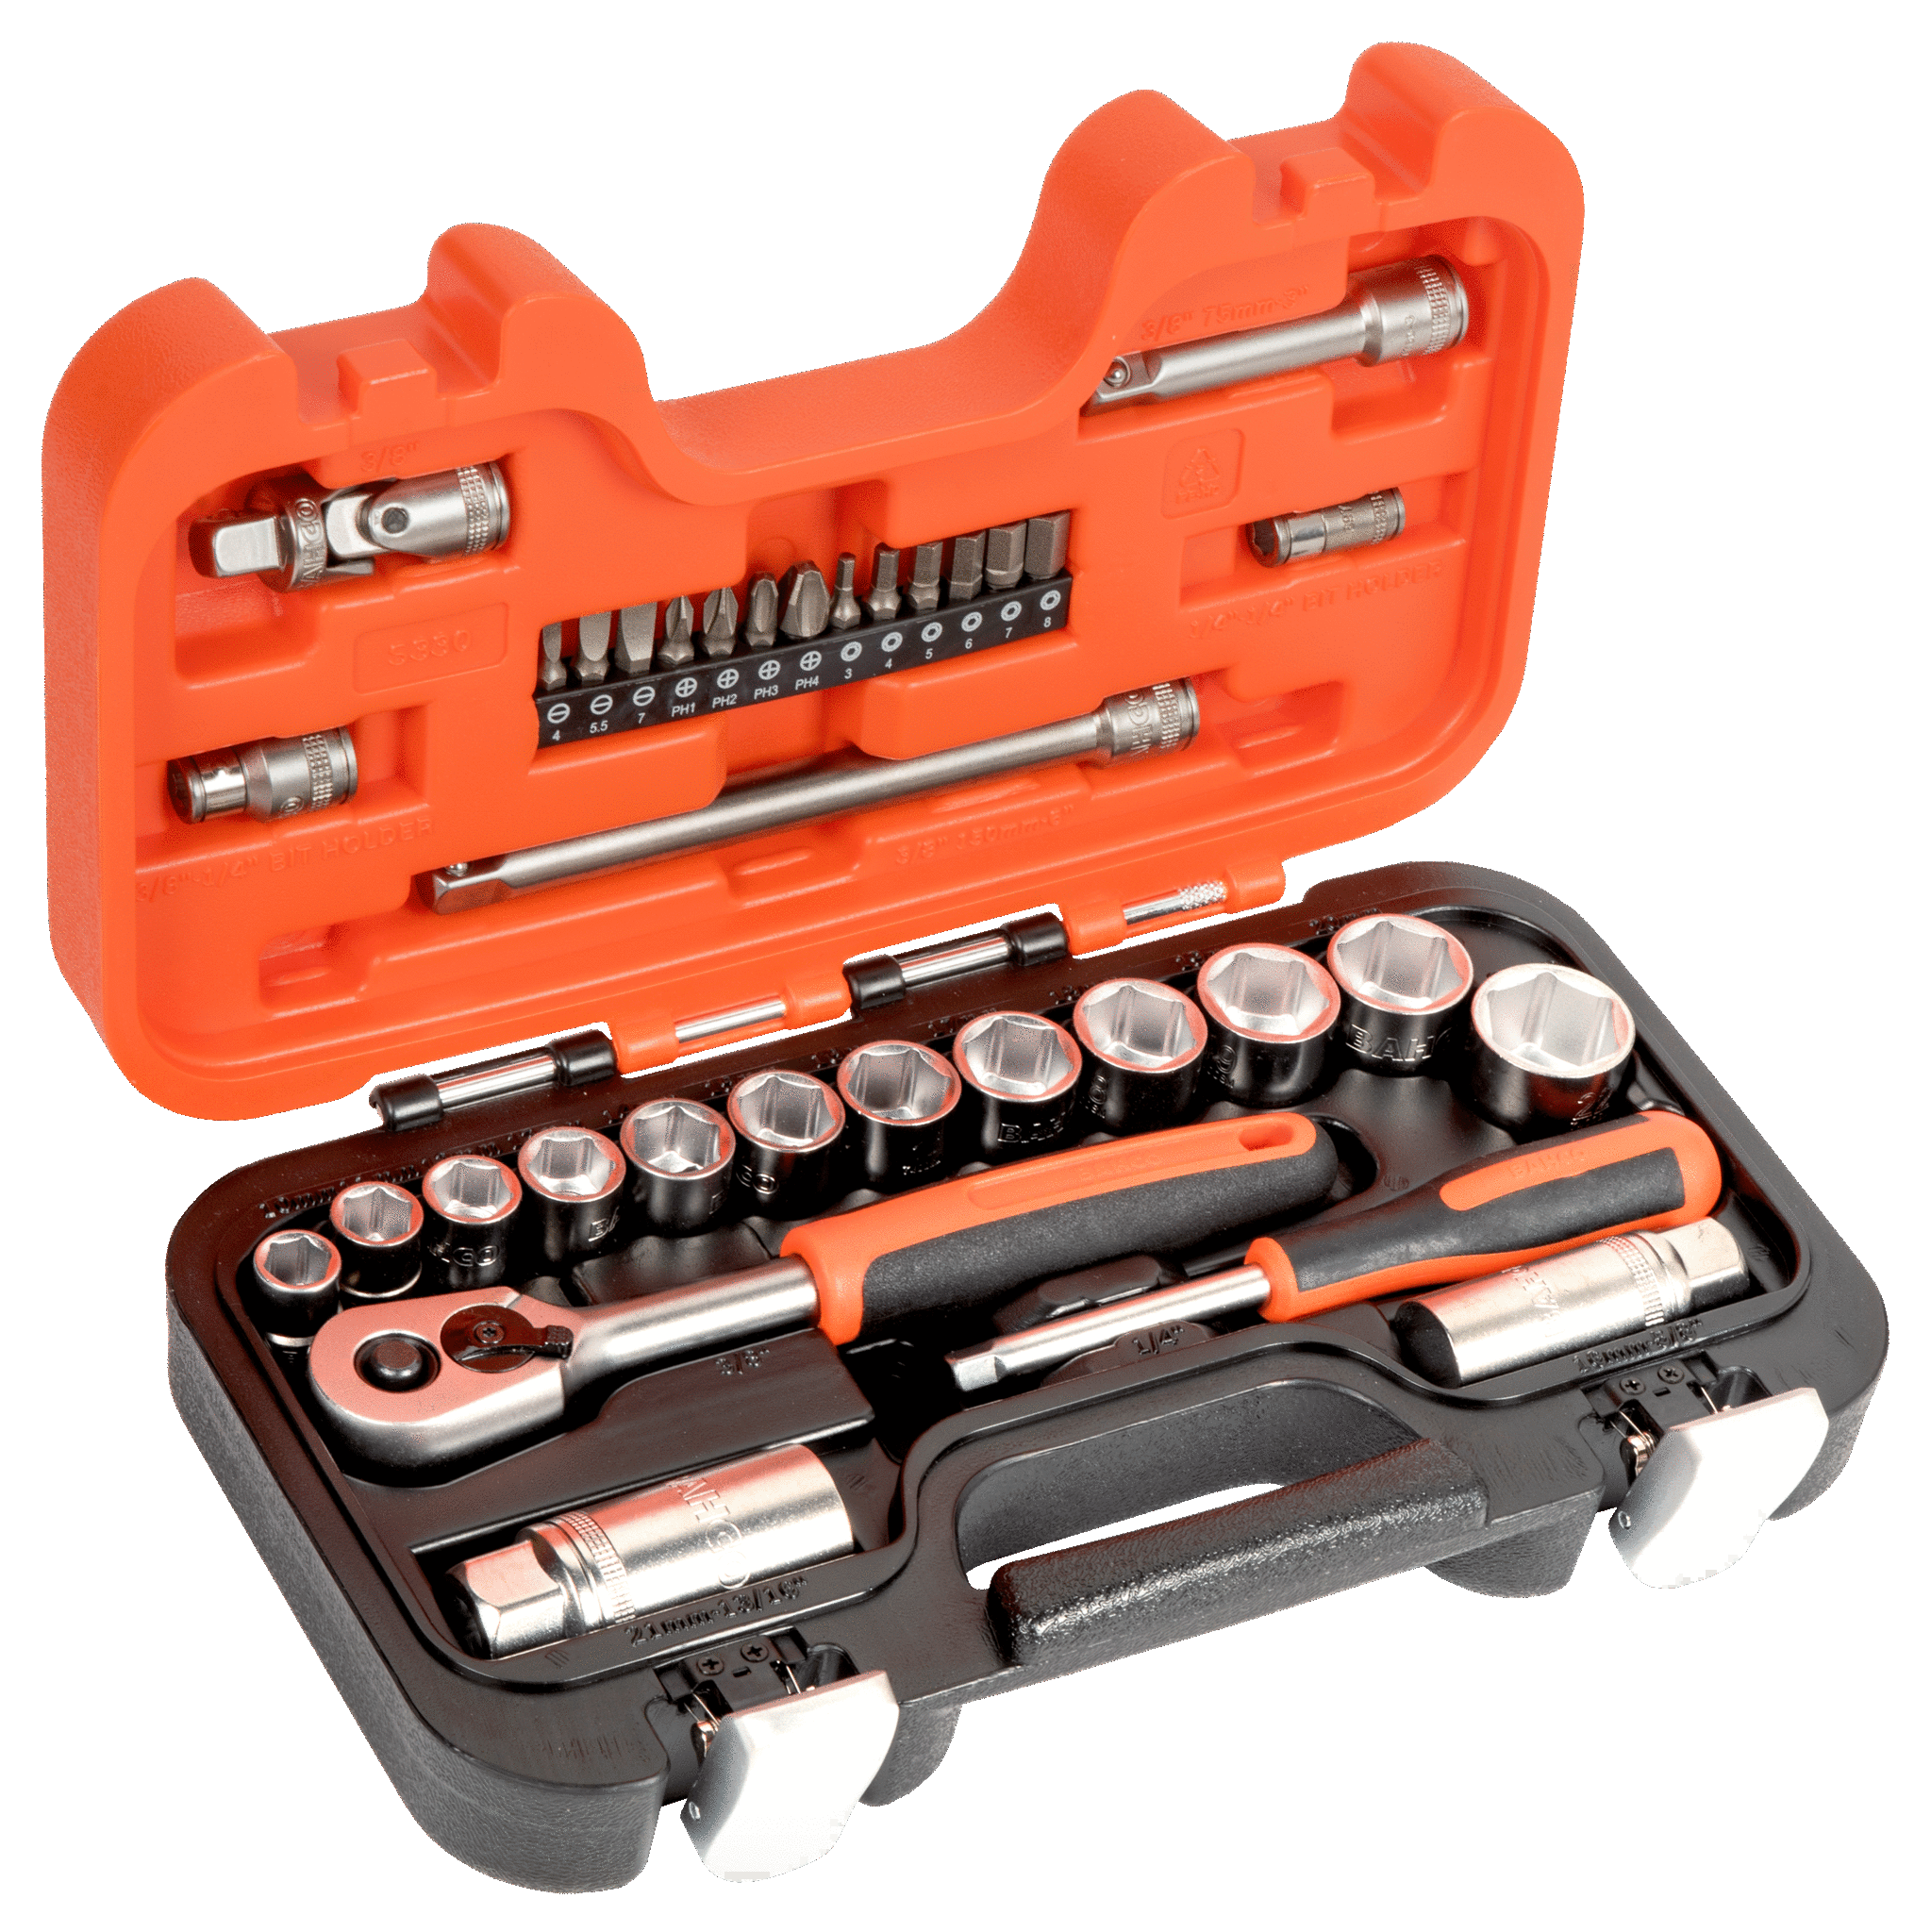 1/4" and 3/8" Square Drive Socket Set with Metric Hex Profile and Ratchet - S330 by Bahco